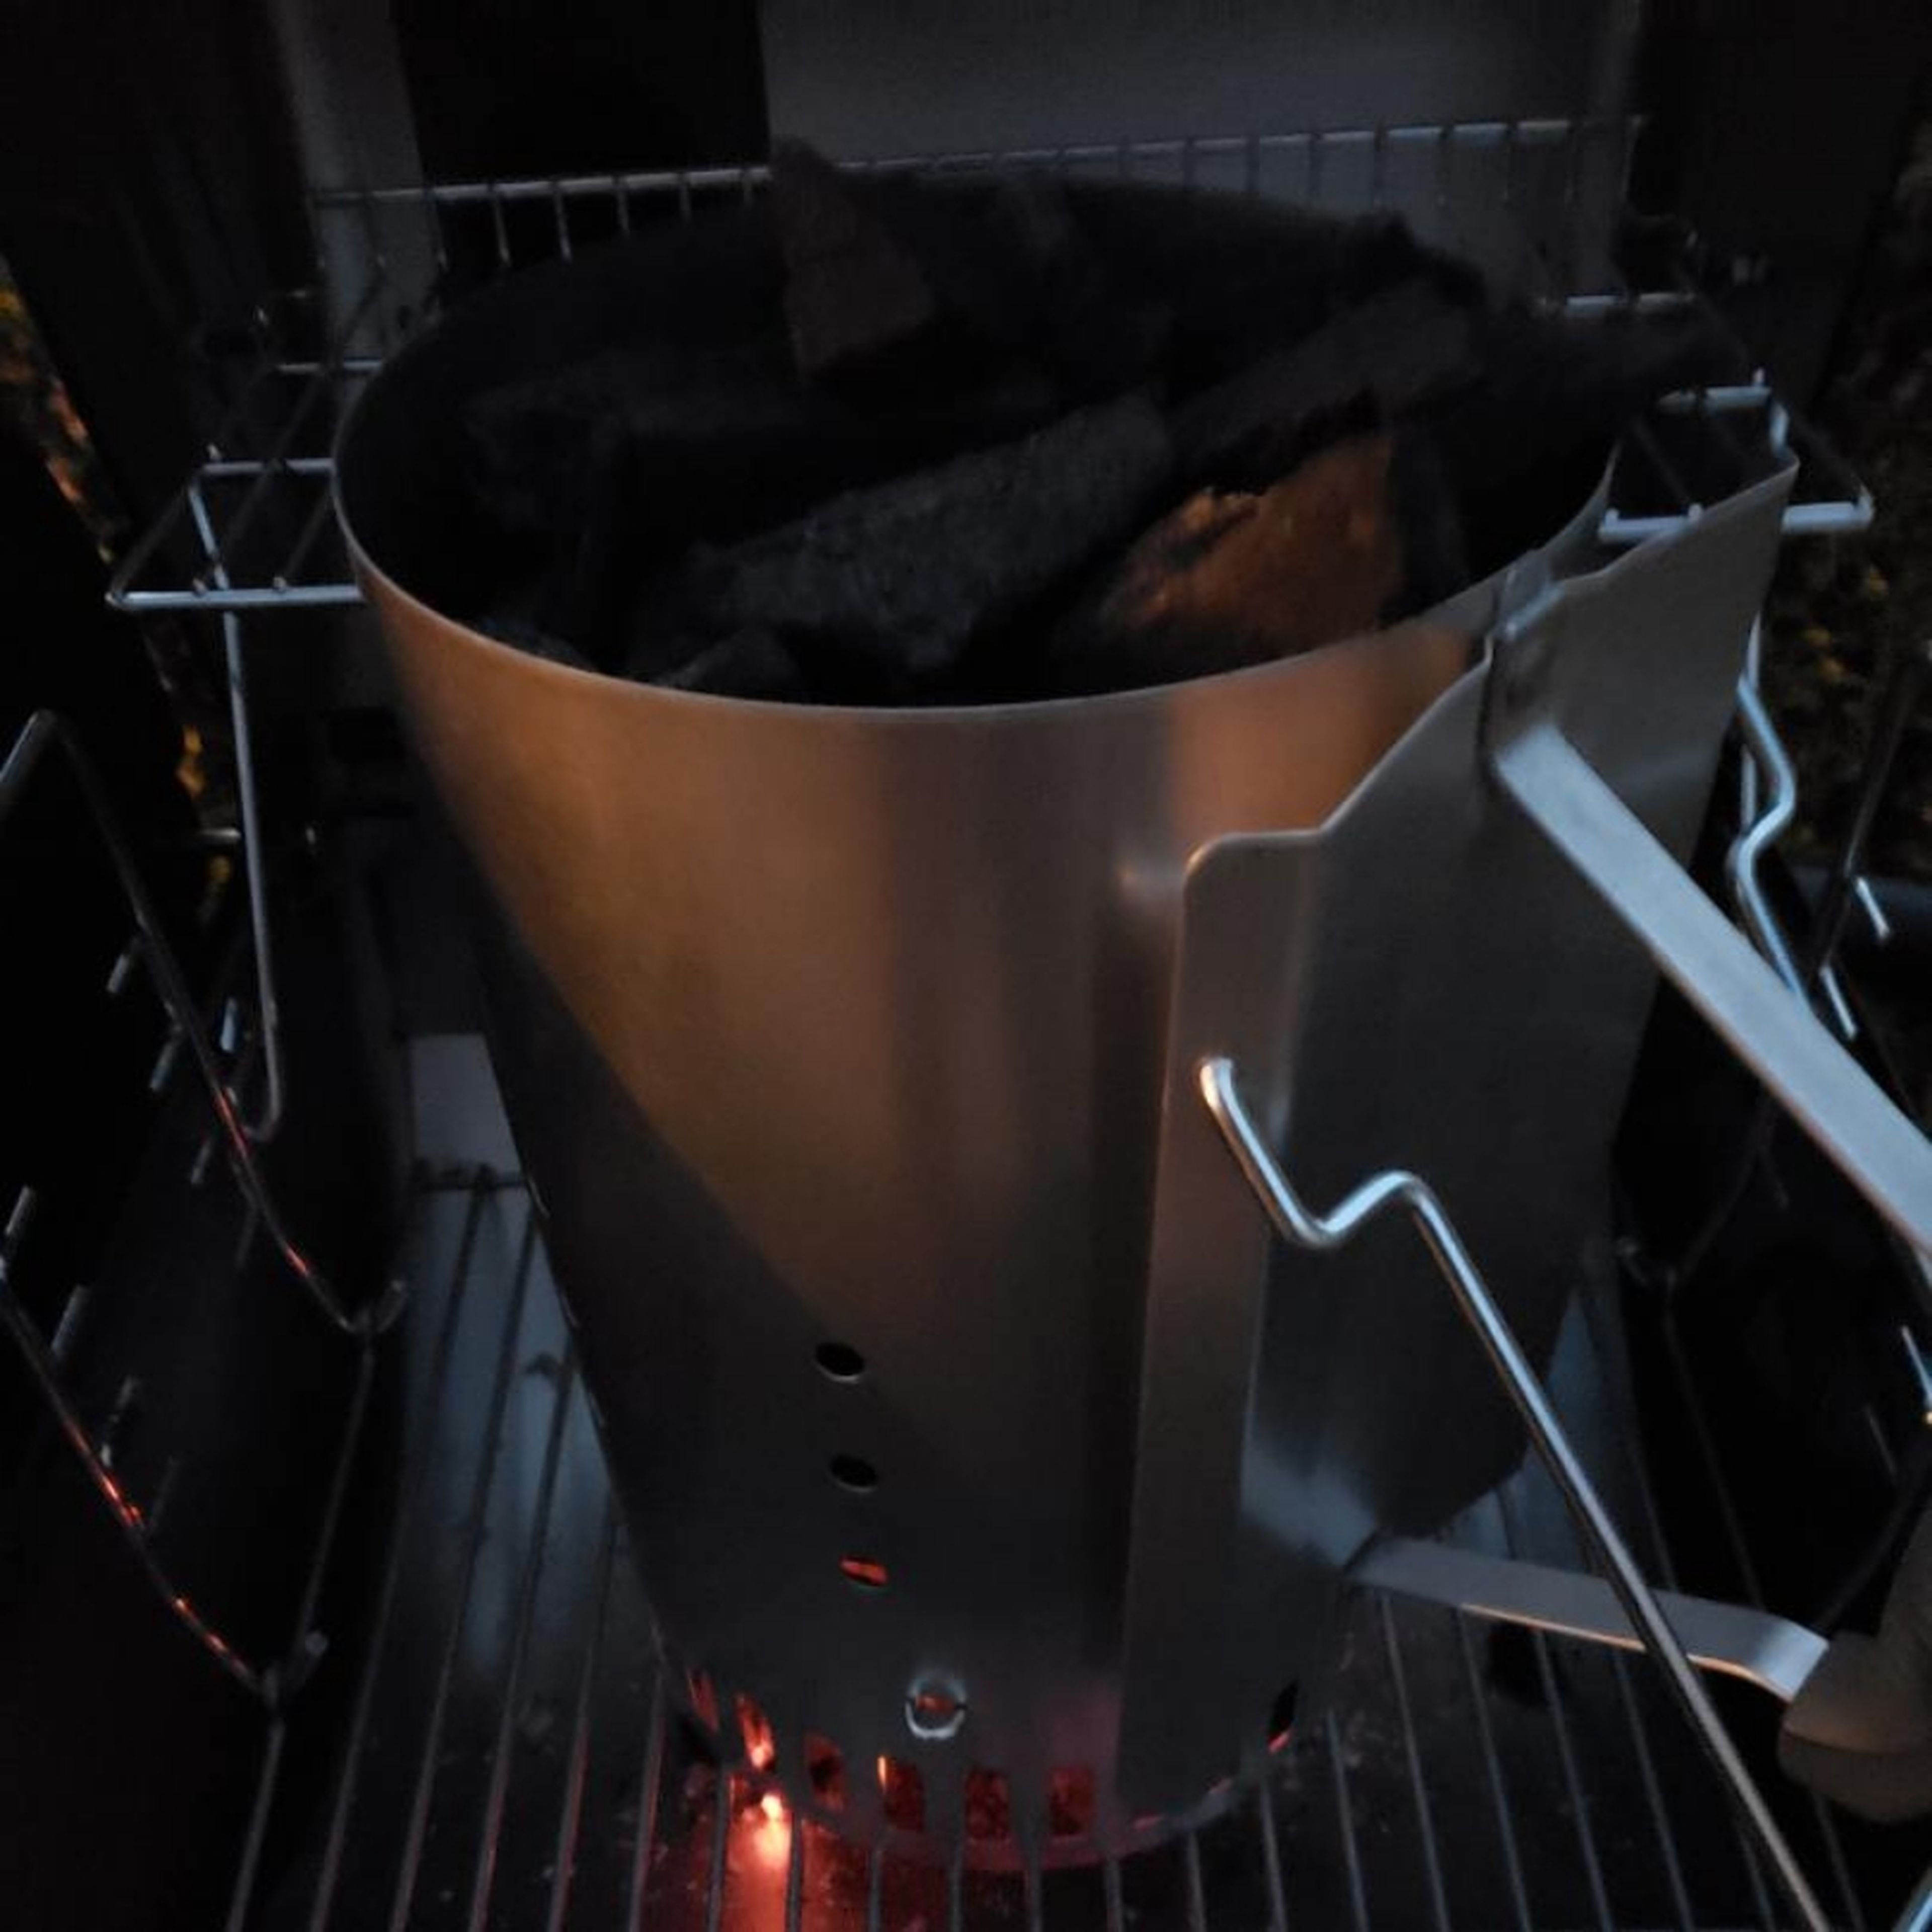 Light charcoal with a chimney starter *DO NOT USE LIGHTER FLUID!* just a suggestion, but not really. let steaks come to room temp while fire goes. Dump coals when white hot and cover grill, allowing grates to heat.